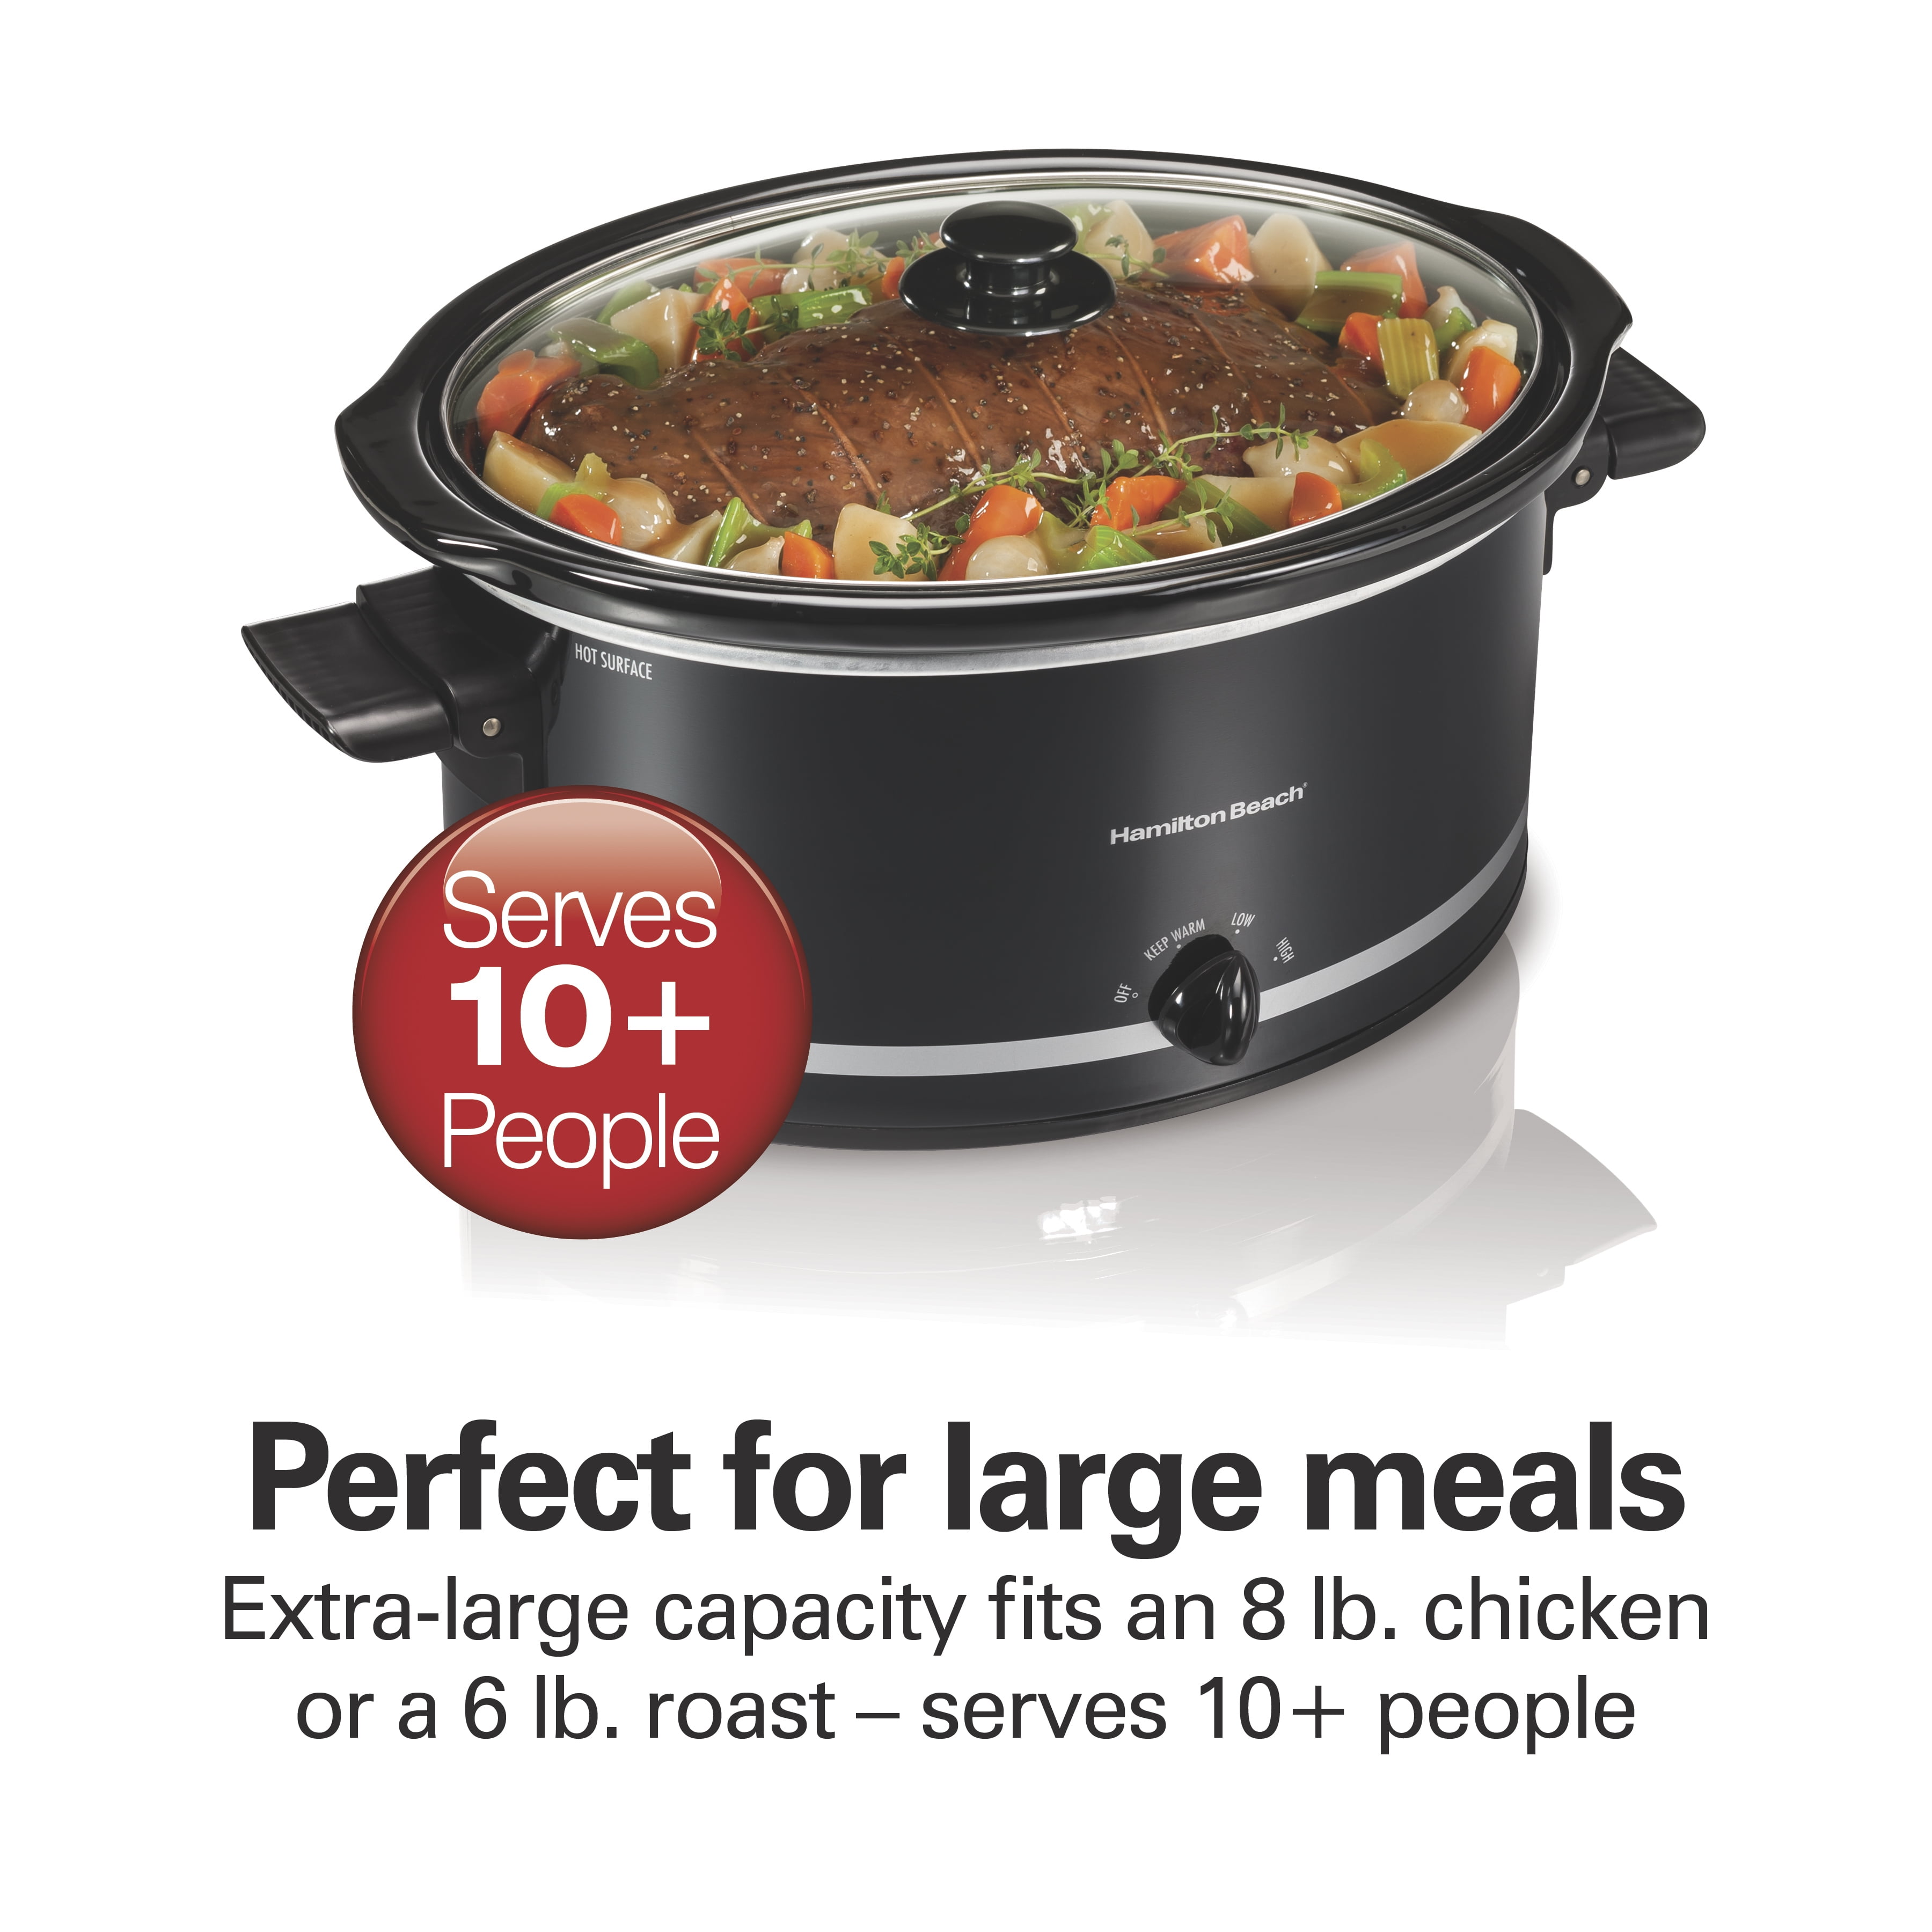 De'Longhi 6-Quart Silver Rectangle Slow Cooker in the Slow Cookers  department at